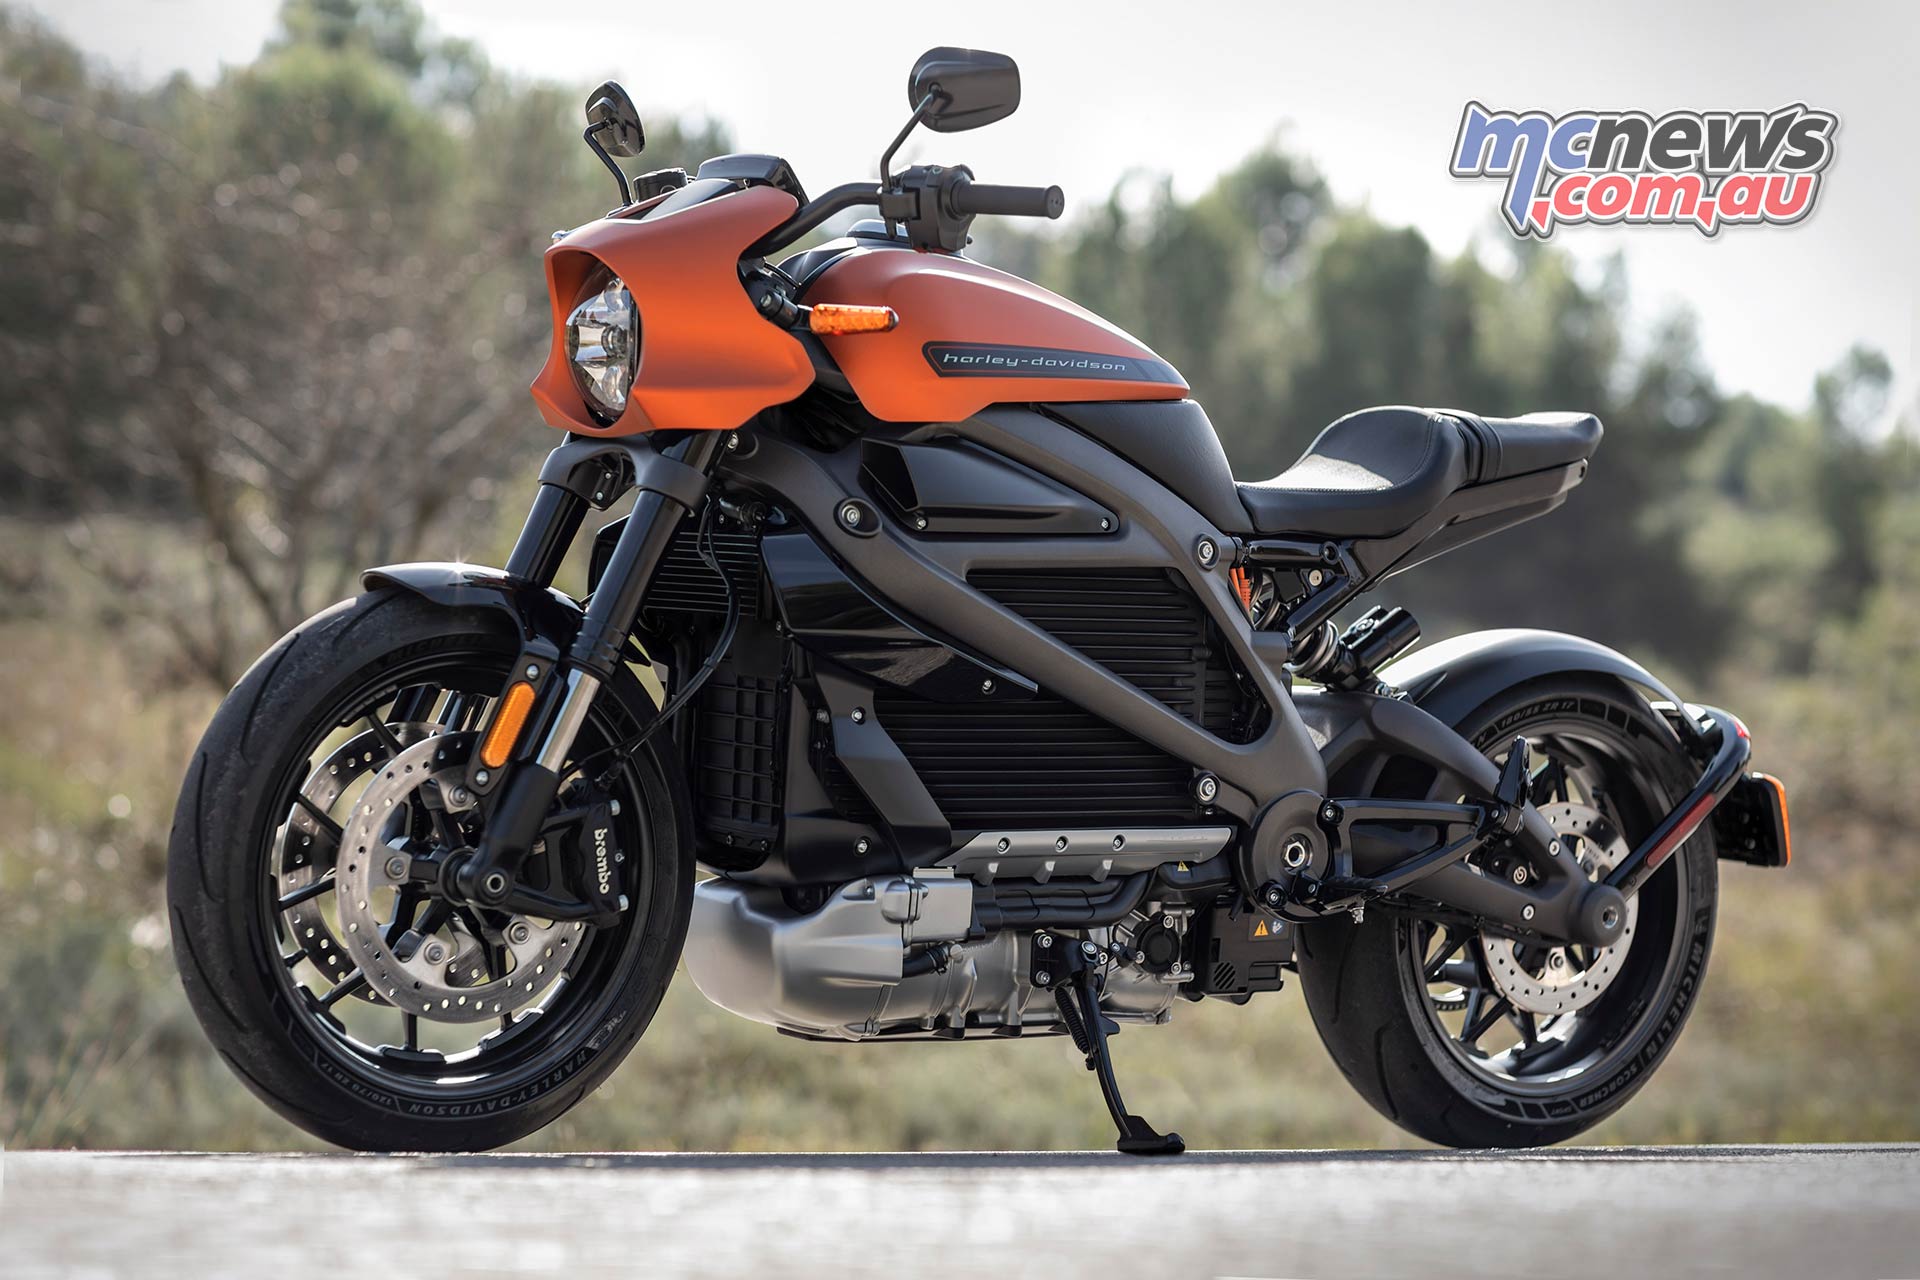 Harley Davidson Livewire Likely To Be Around 44k Aud Motorcycle News